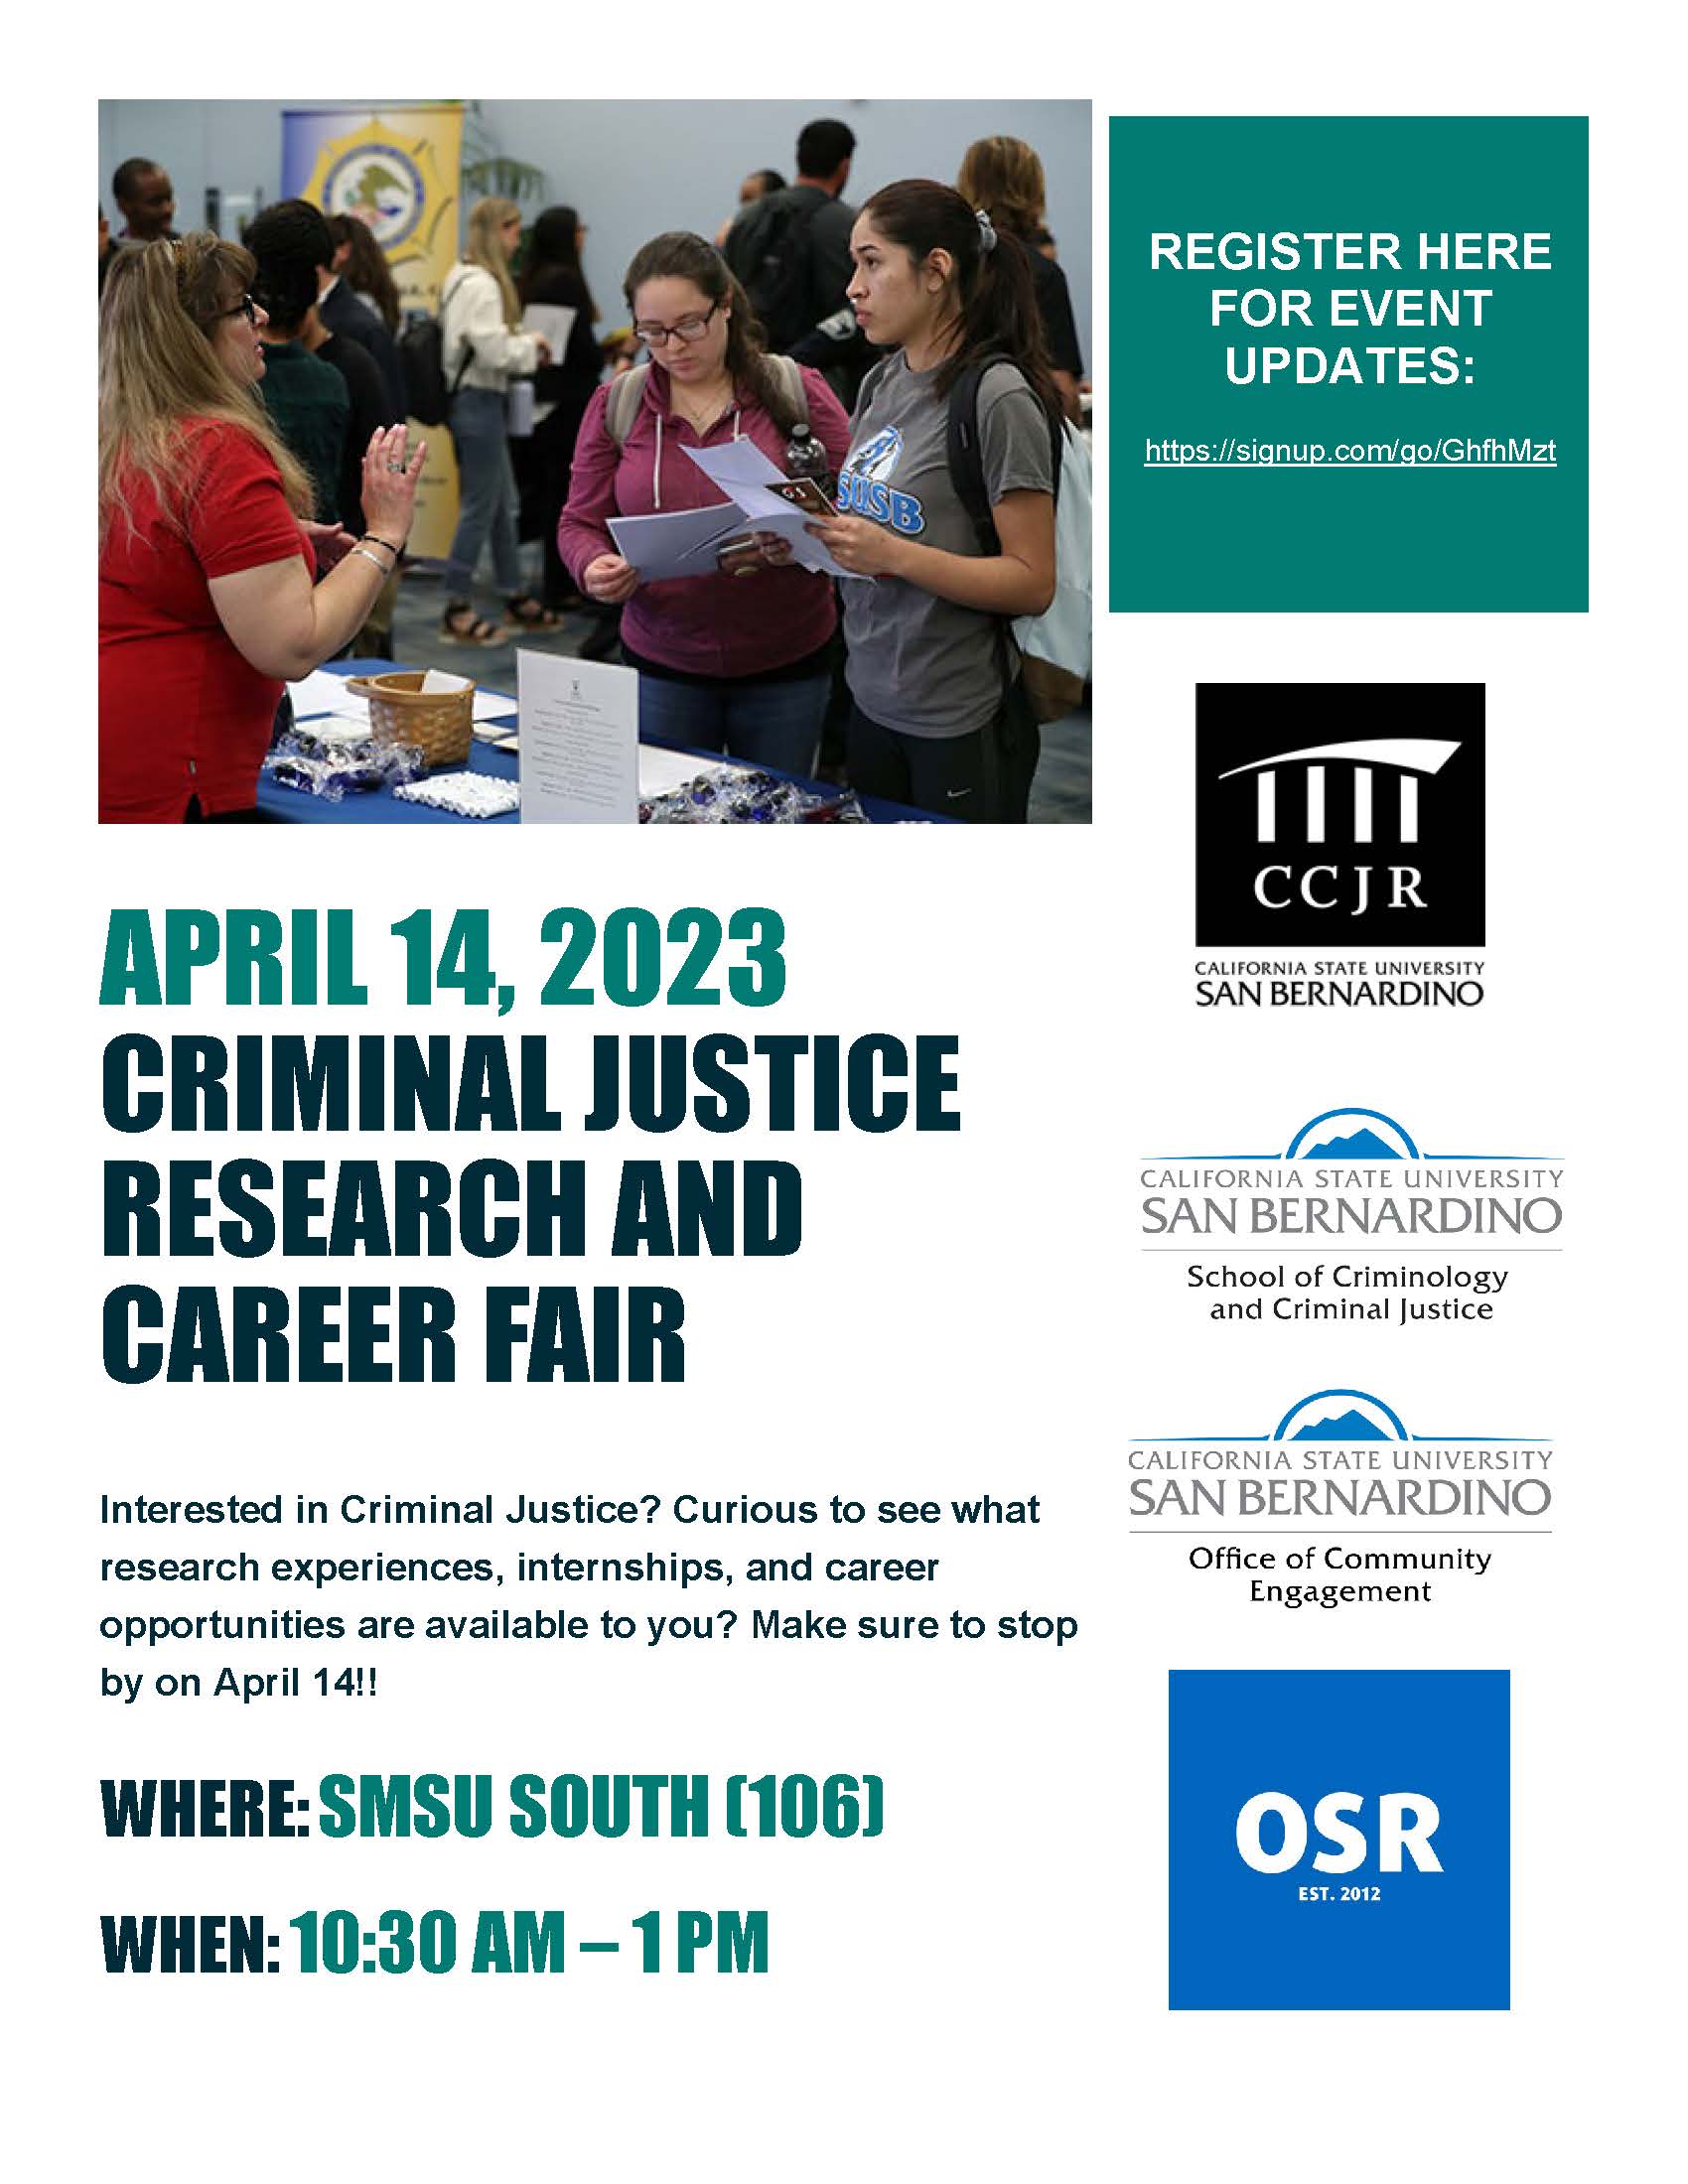 Criminal Justice Research and Career Fair Flyer